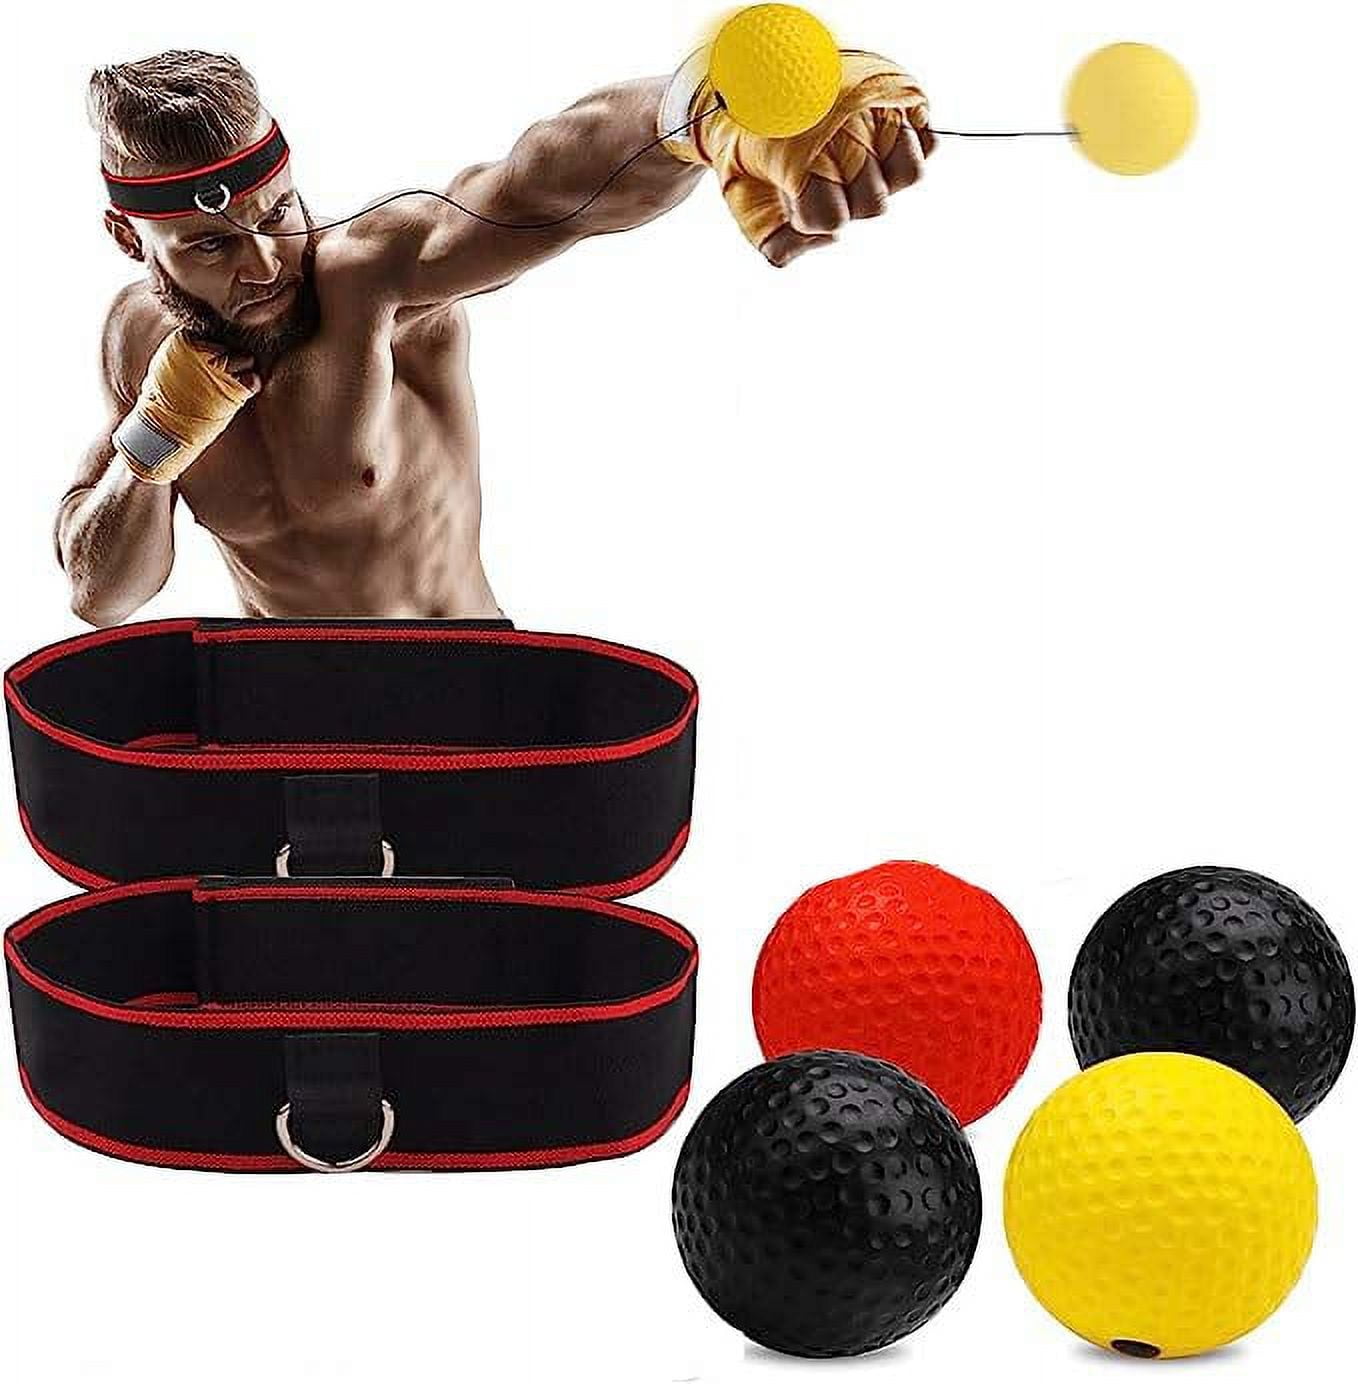 Leosportz Boxing Reflex Ball Set?Boxing Boxing Gear for Kids and Adults  Boxing Fight Ball - Buy Leosportz Boxing Reflex Ball Set?Boxing Boxing Gear  for Kids and Adults Boxing Fight Ball Online at